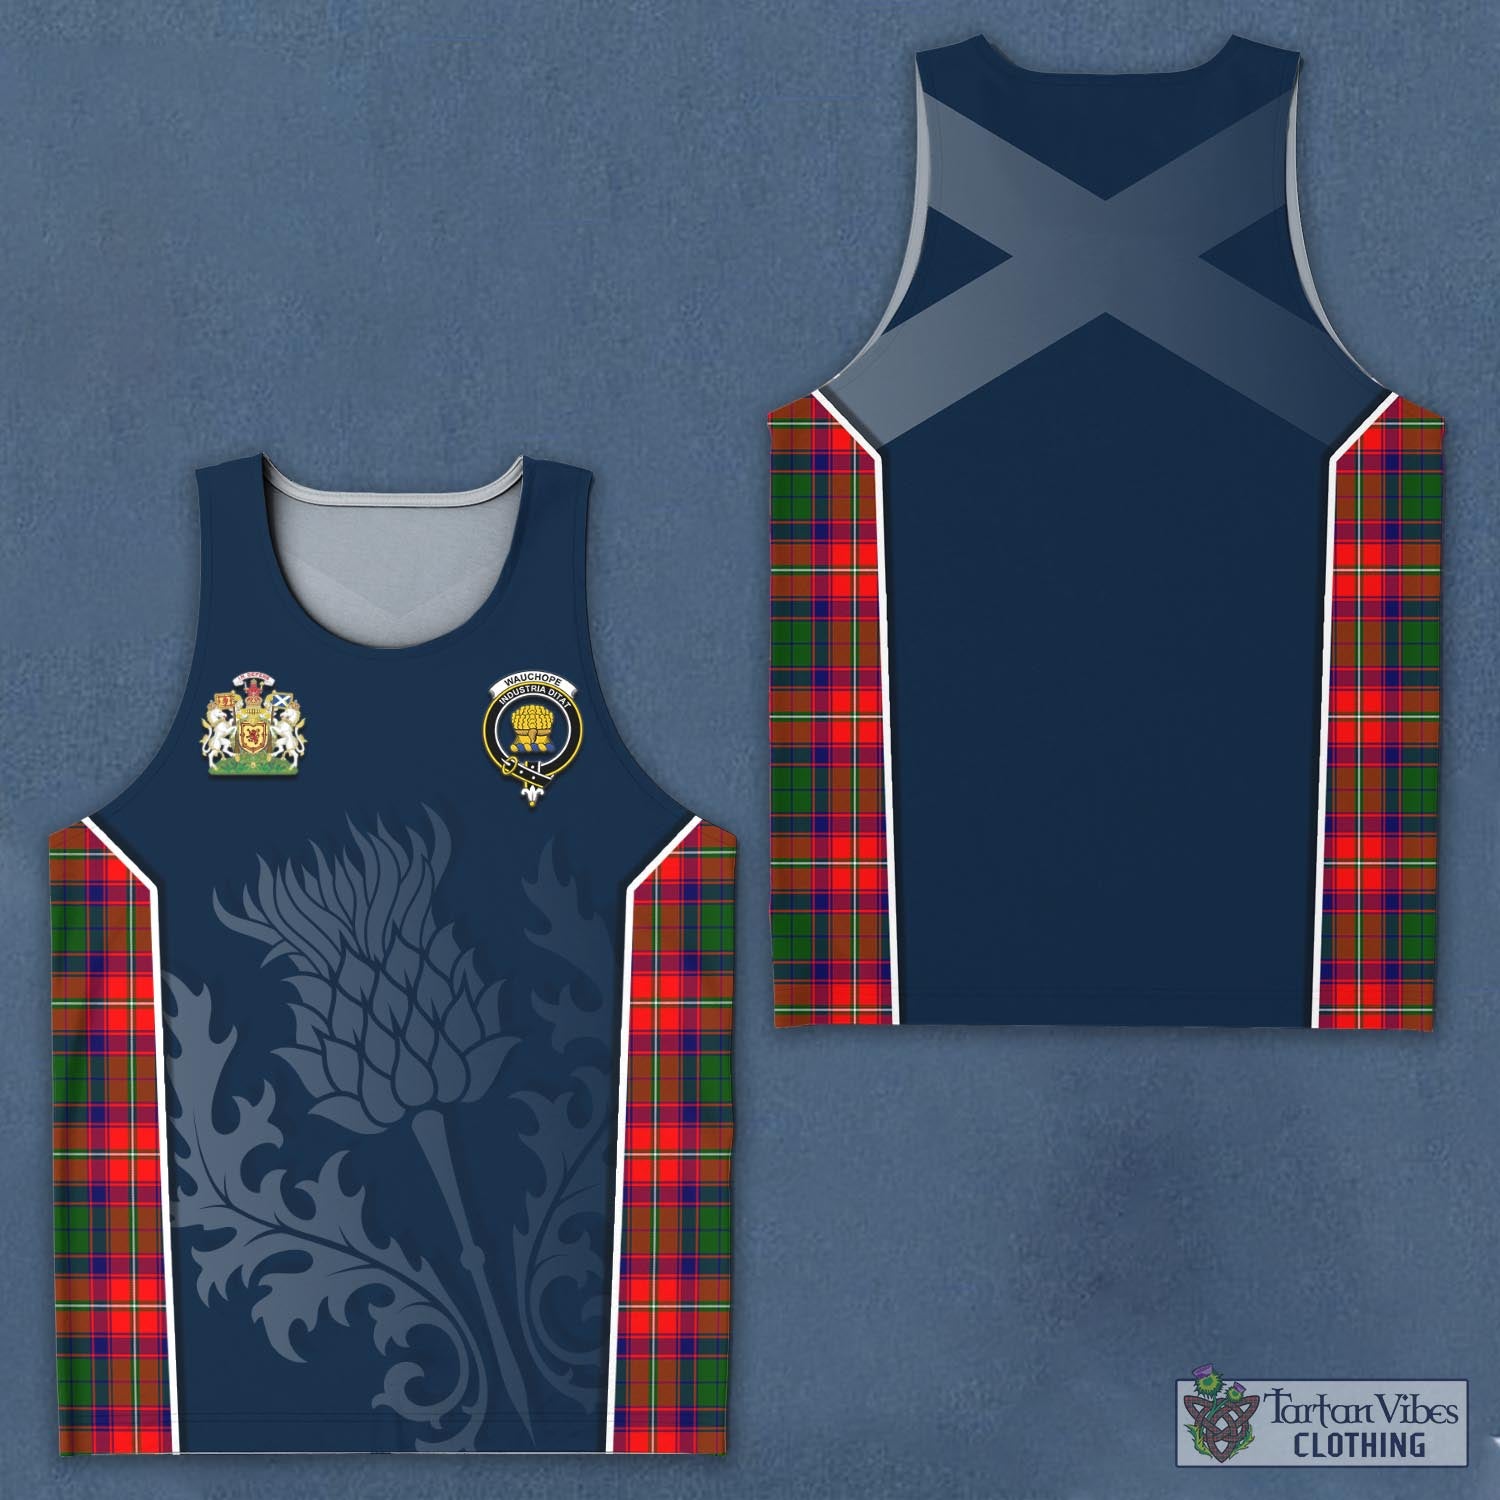 Tartan Vibes Clothing Wauchope Tartan Men's Tanks Top with Family Crest and Scottish Thistle Vibes Sport Style